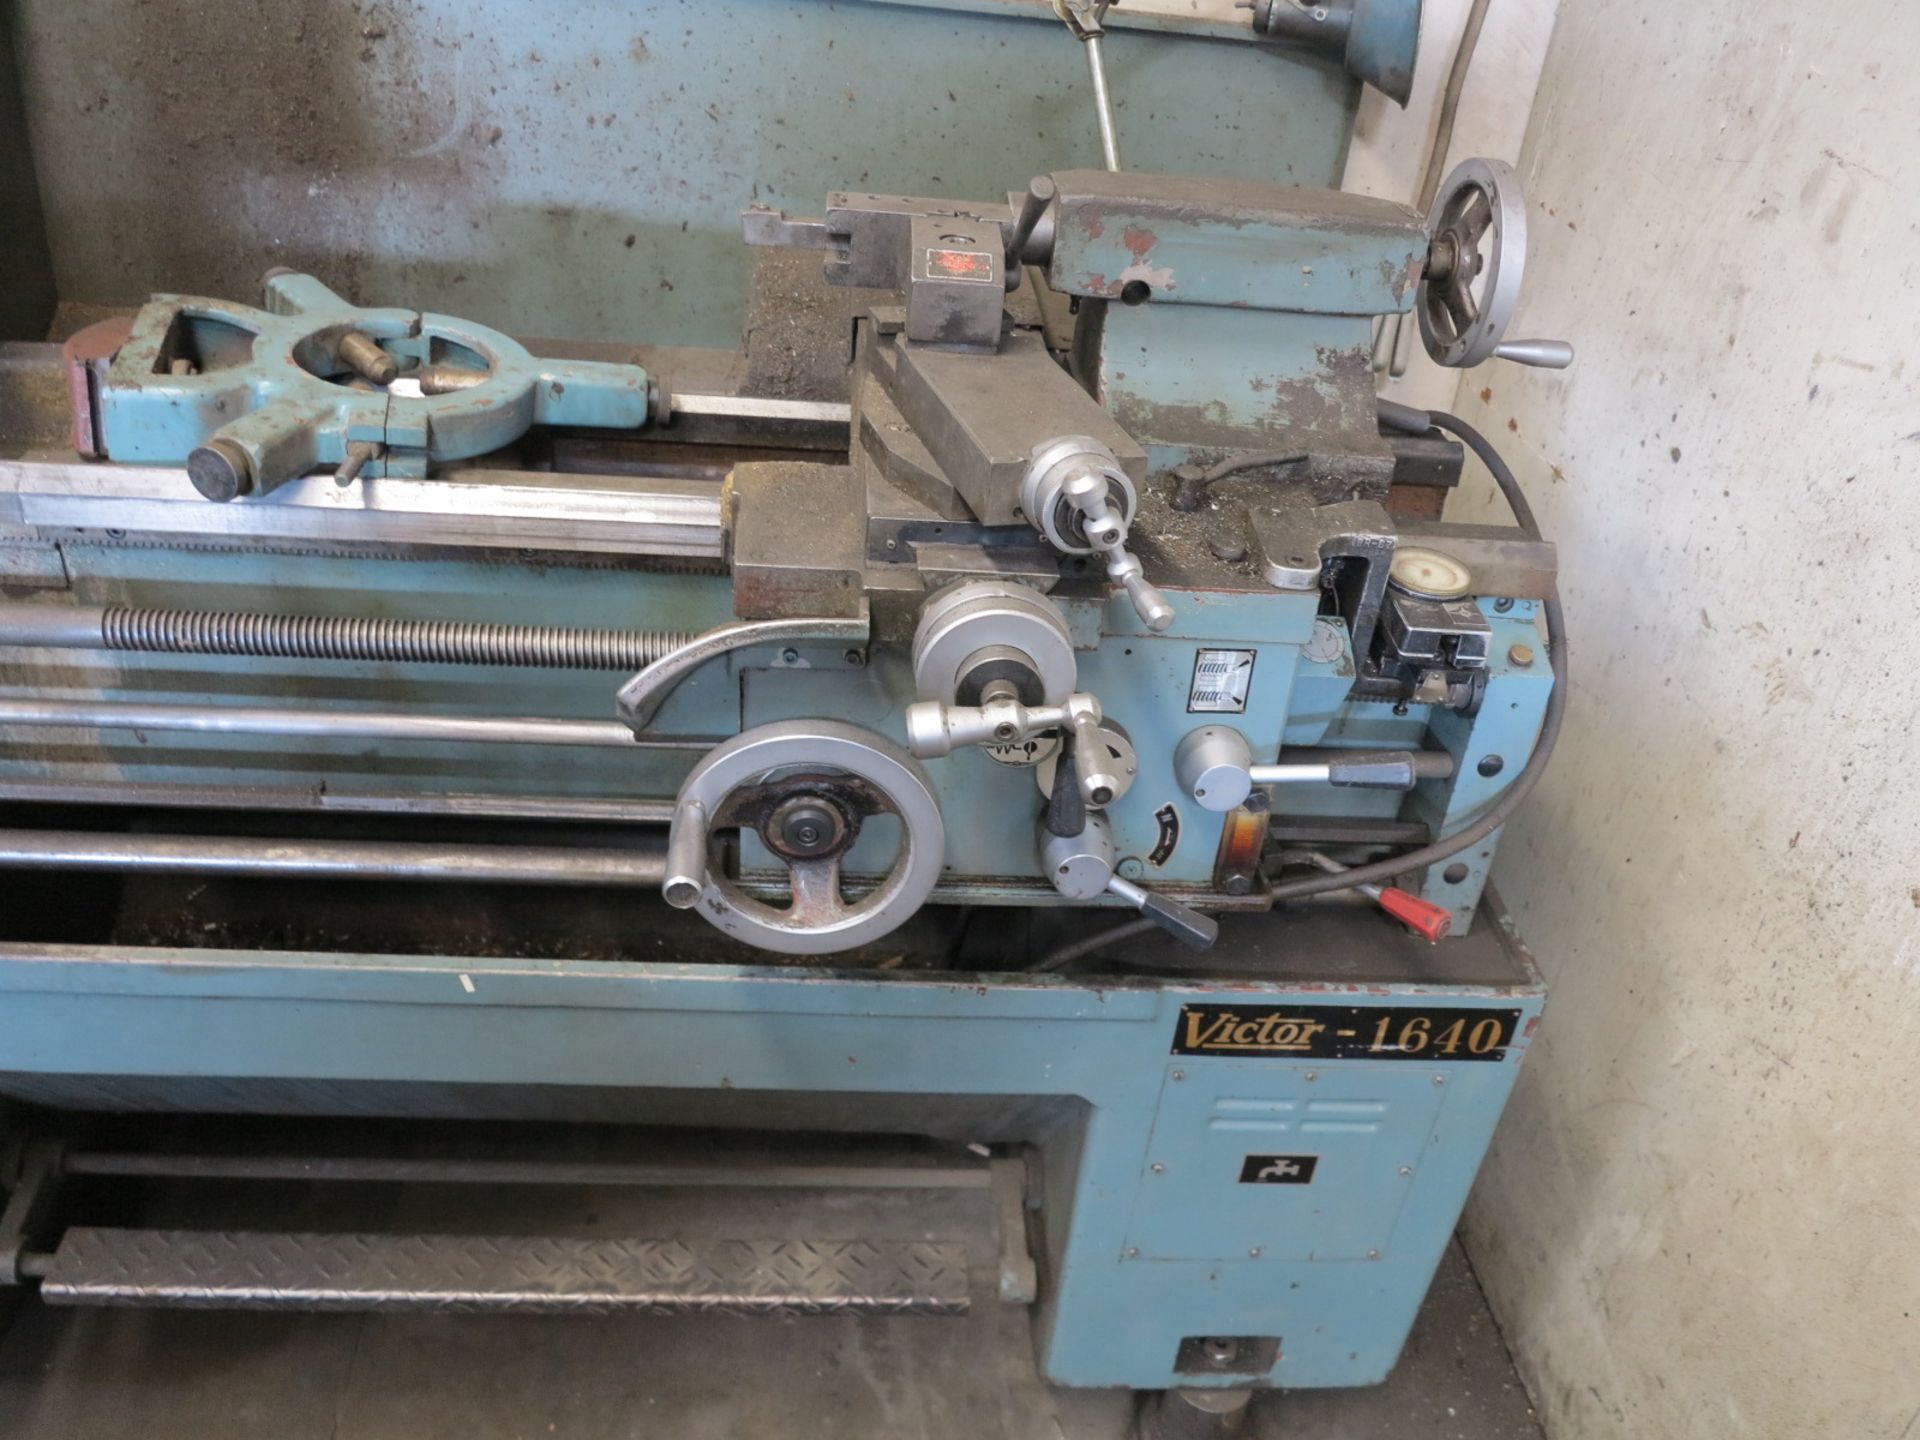 VICTOR 1640 LATHE, W/ 8" 3-JAW CHUCK, STEADY REST, TAILSTOCK - Image 3 of 3